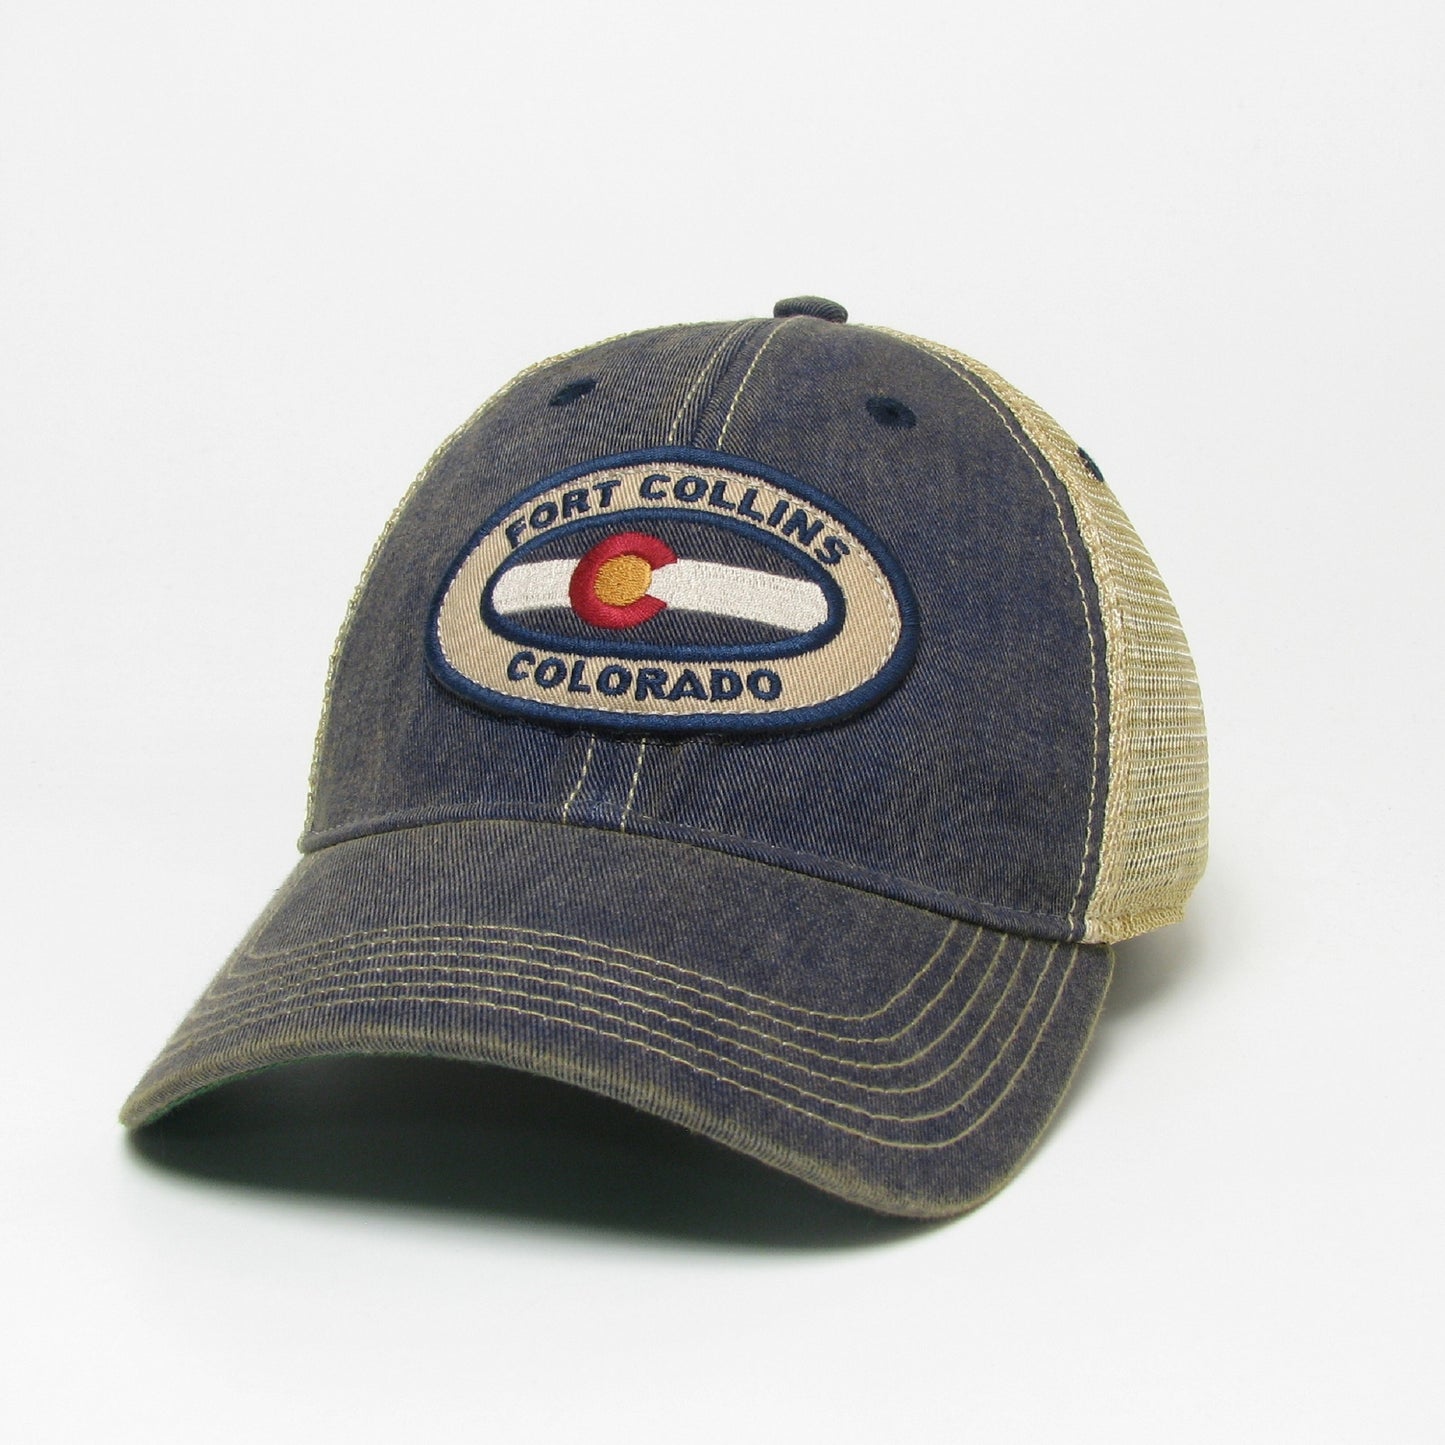 FORT COLLINS COLORADO OVAL PATCH TRUCKER HAT - NAVY